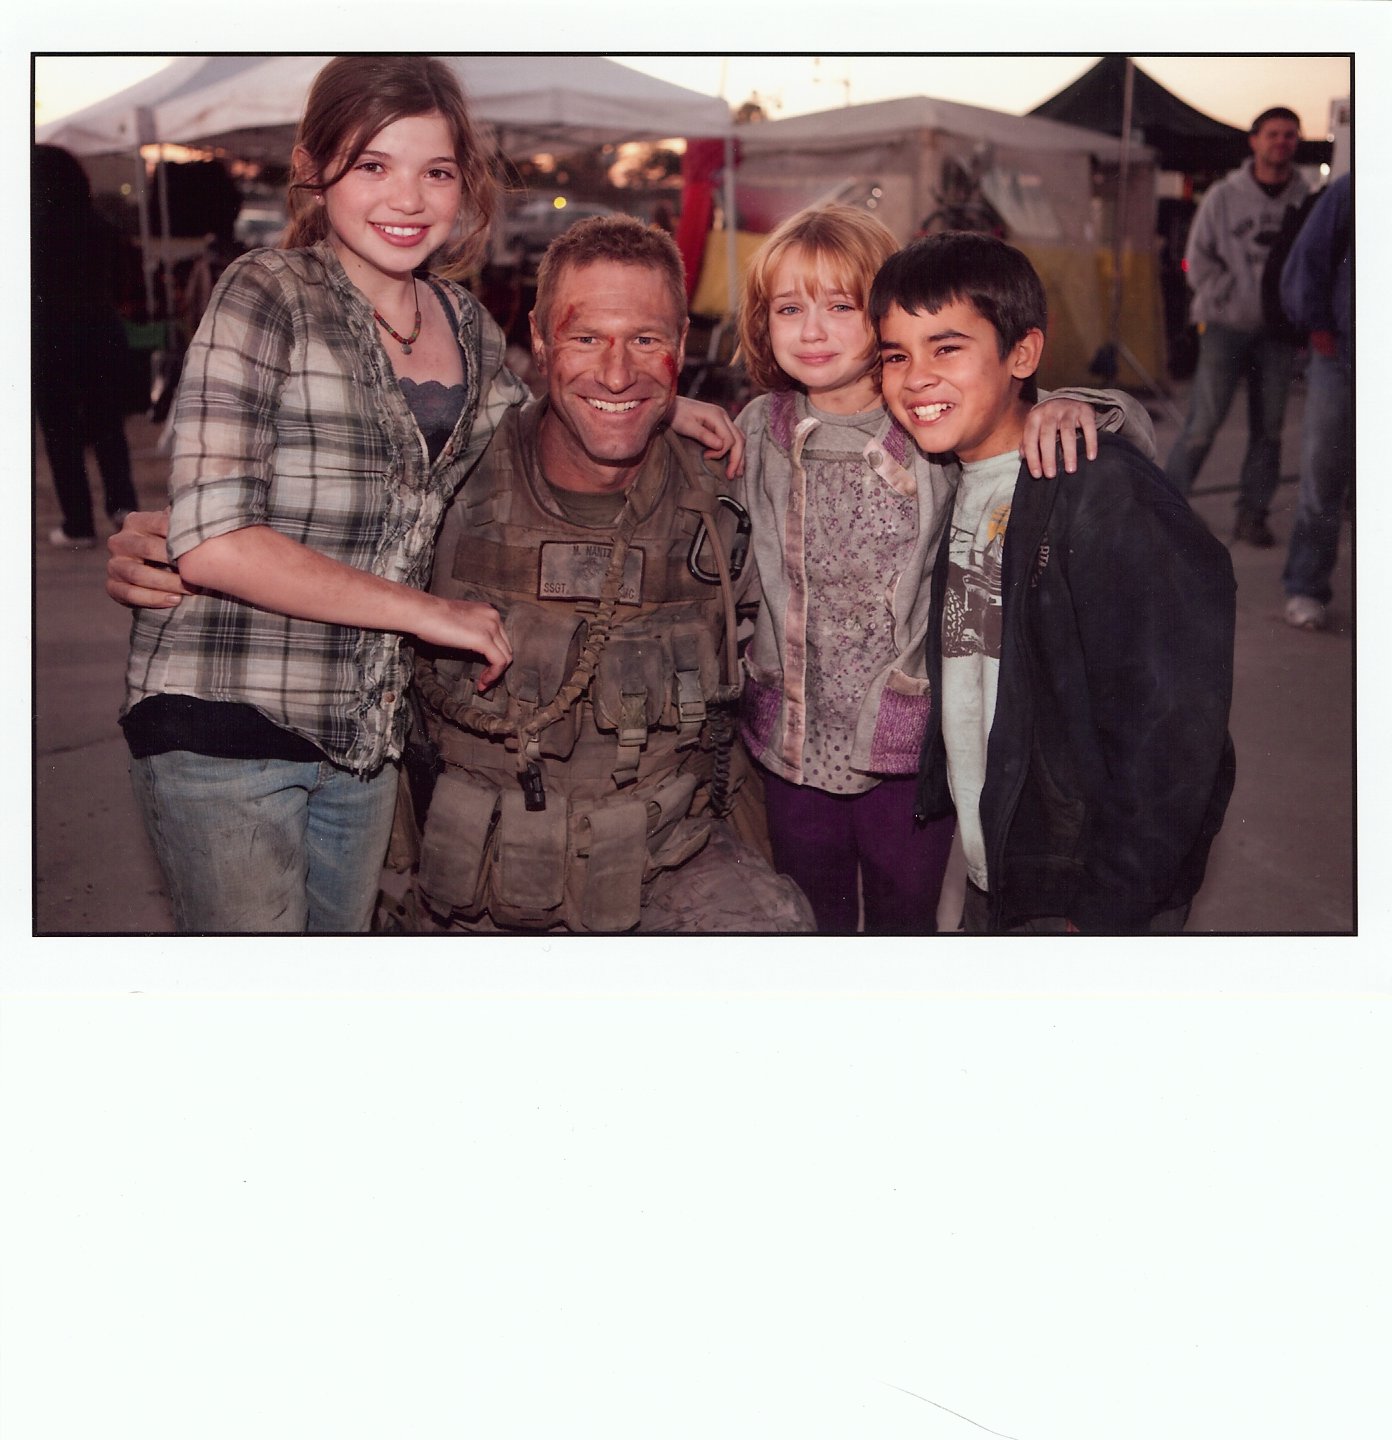 Jadin with Aaron Eckhart, Joey King, Bryce Cass On The Set Of BATTLE:Los Angeles